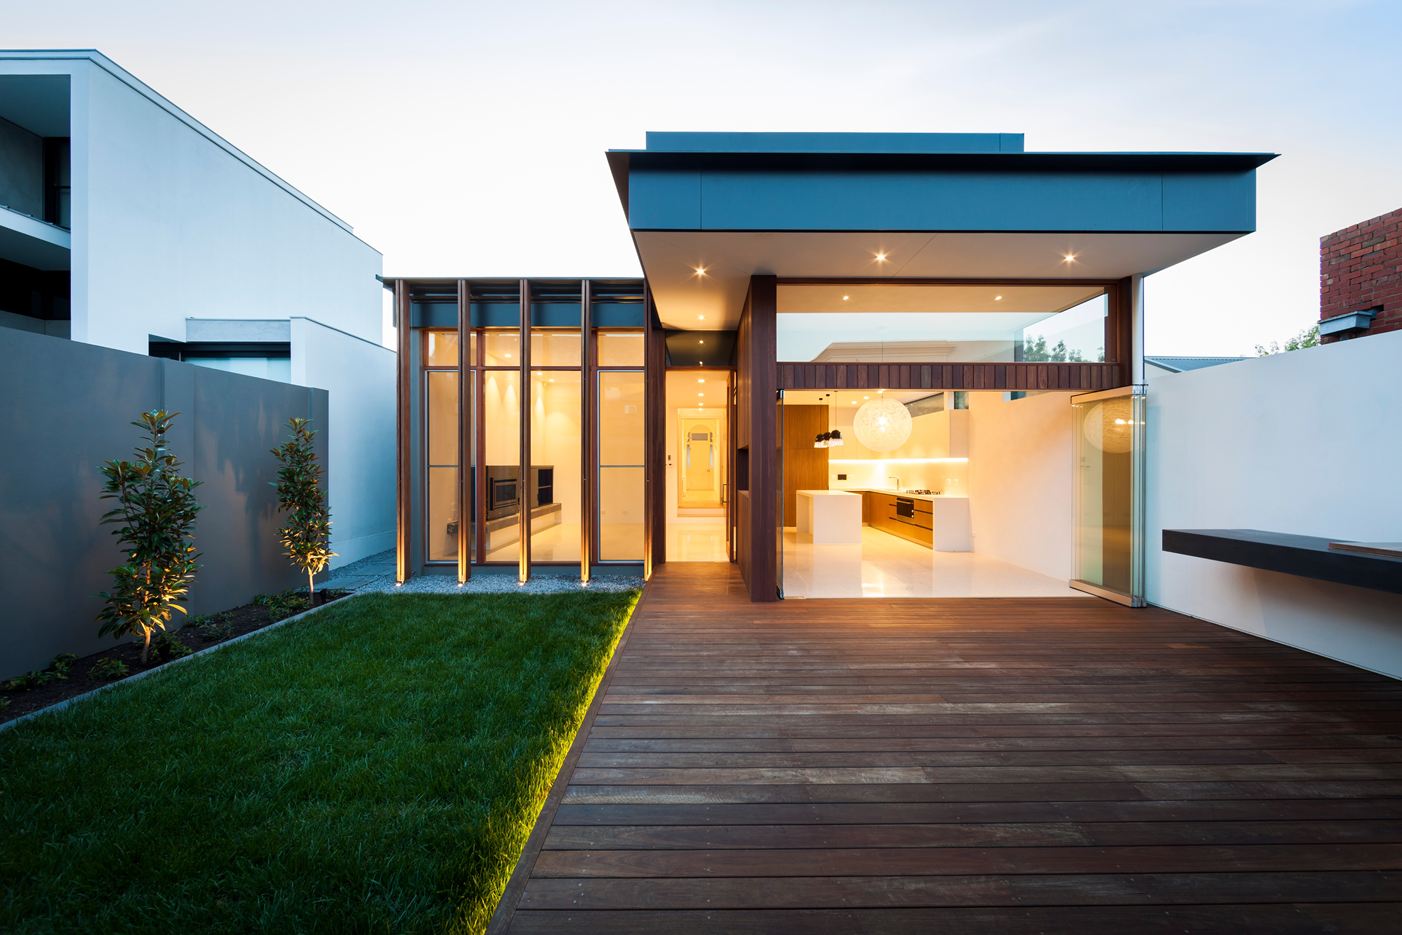 Armadale House 2 in Armadale, Australia by MITSUORI ARCHITECTS